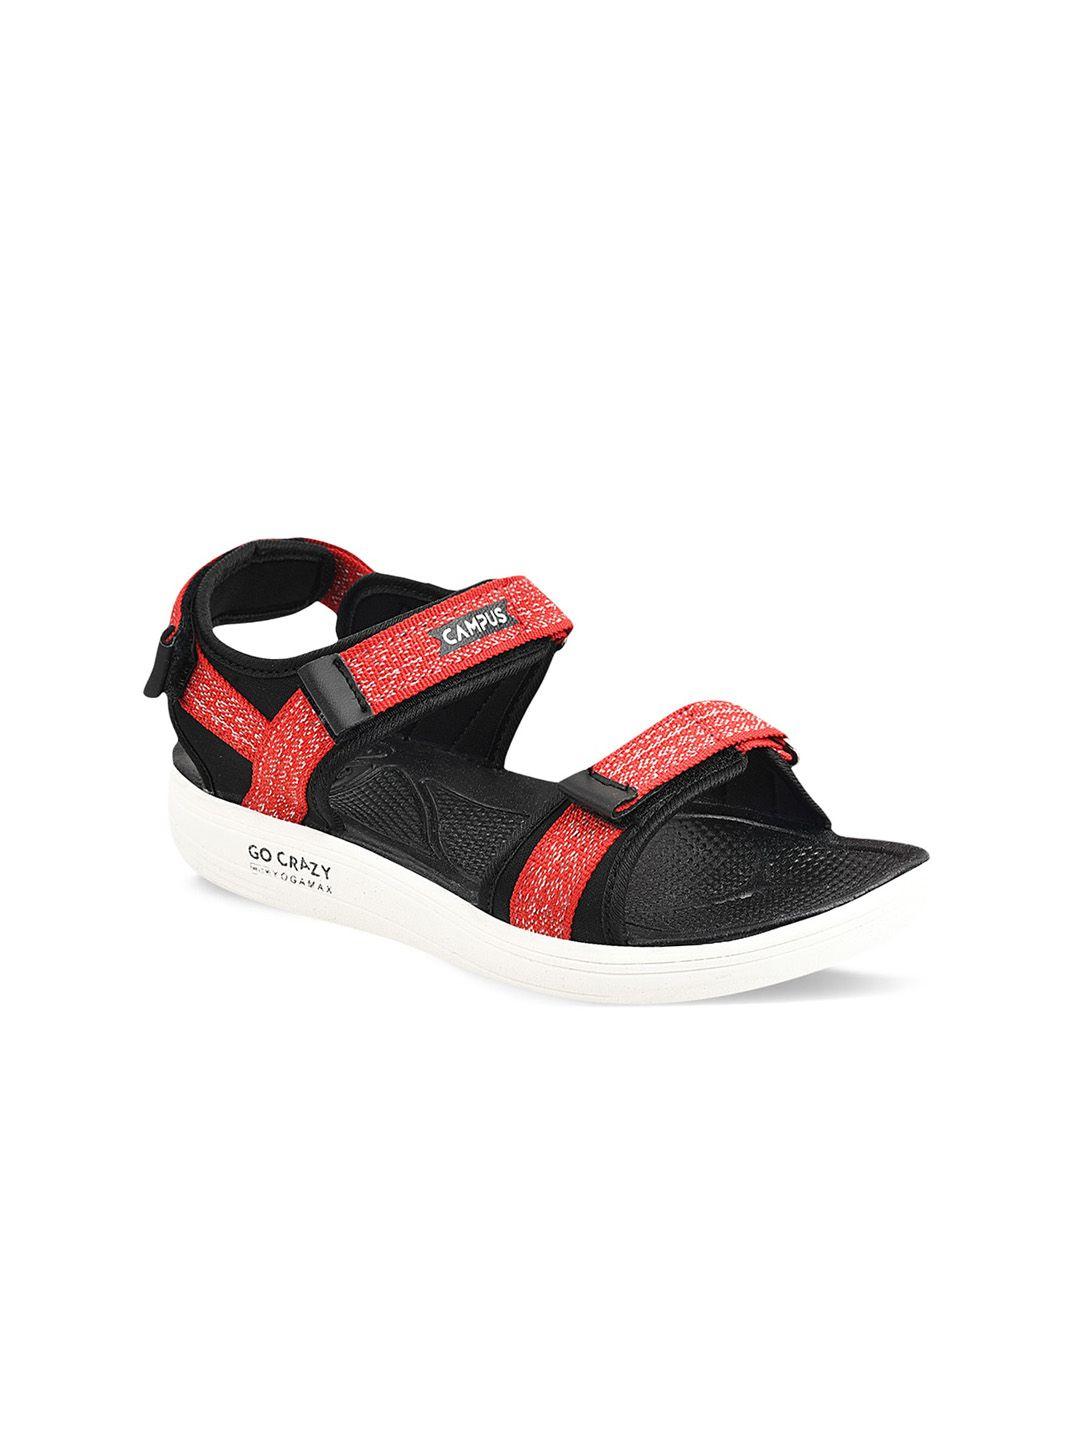 campus-women-black-&-red-solid-sports-sandals